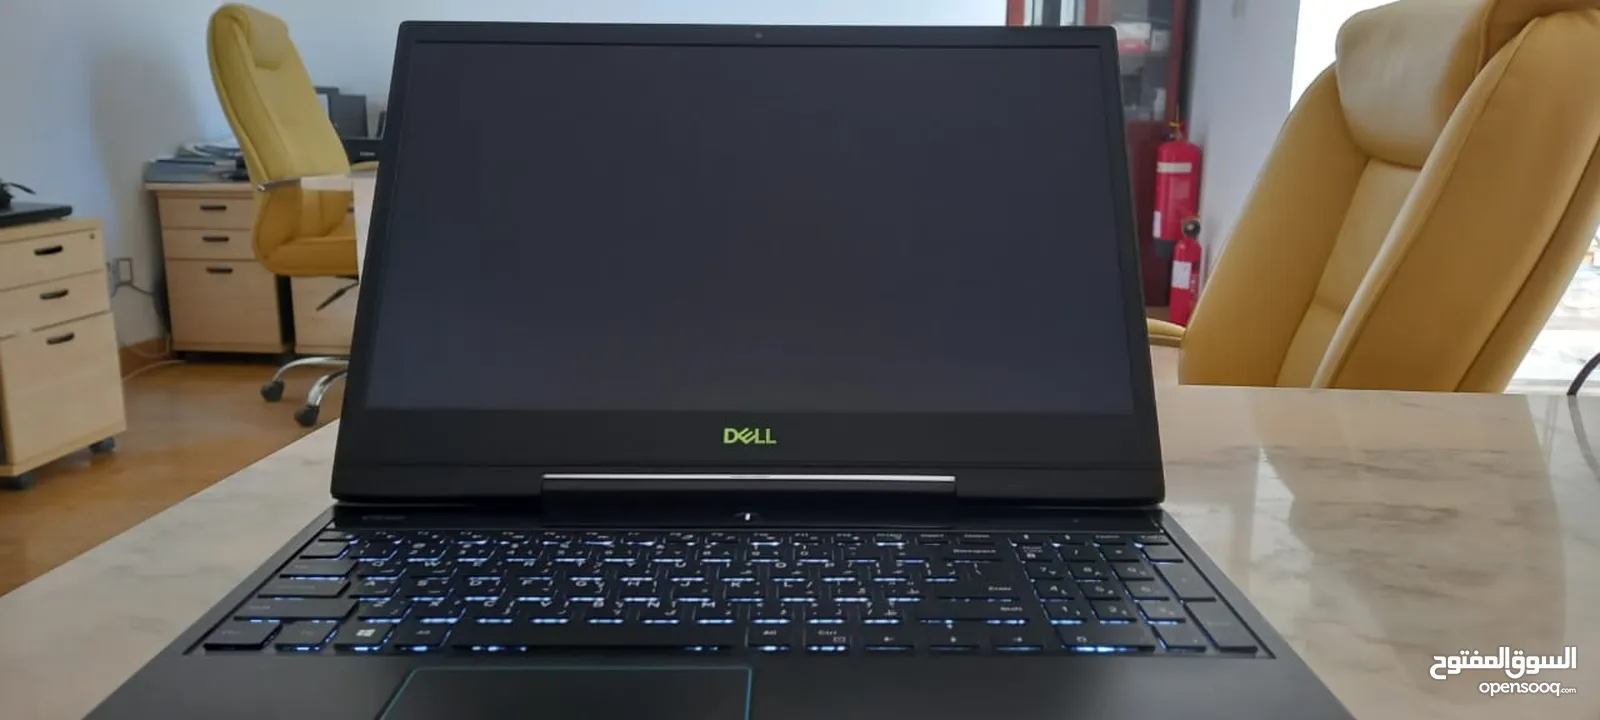 Dell G5 5590 Gaming Laptop: Core i7-9750H@2.60GHz, NVidia GeForce GTX 1650, 15.6" 1920x1080 Full HD